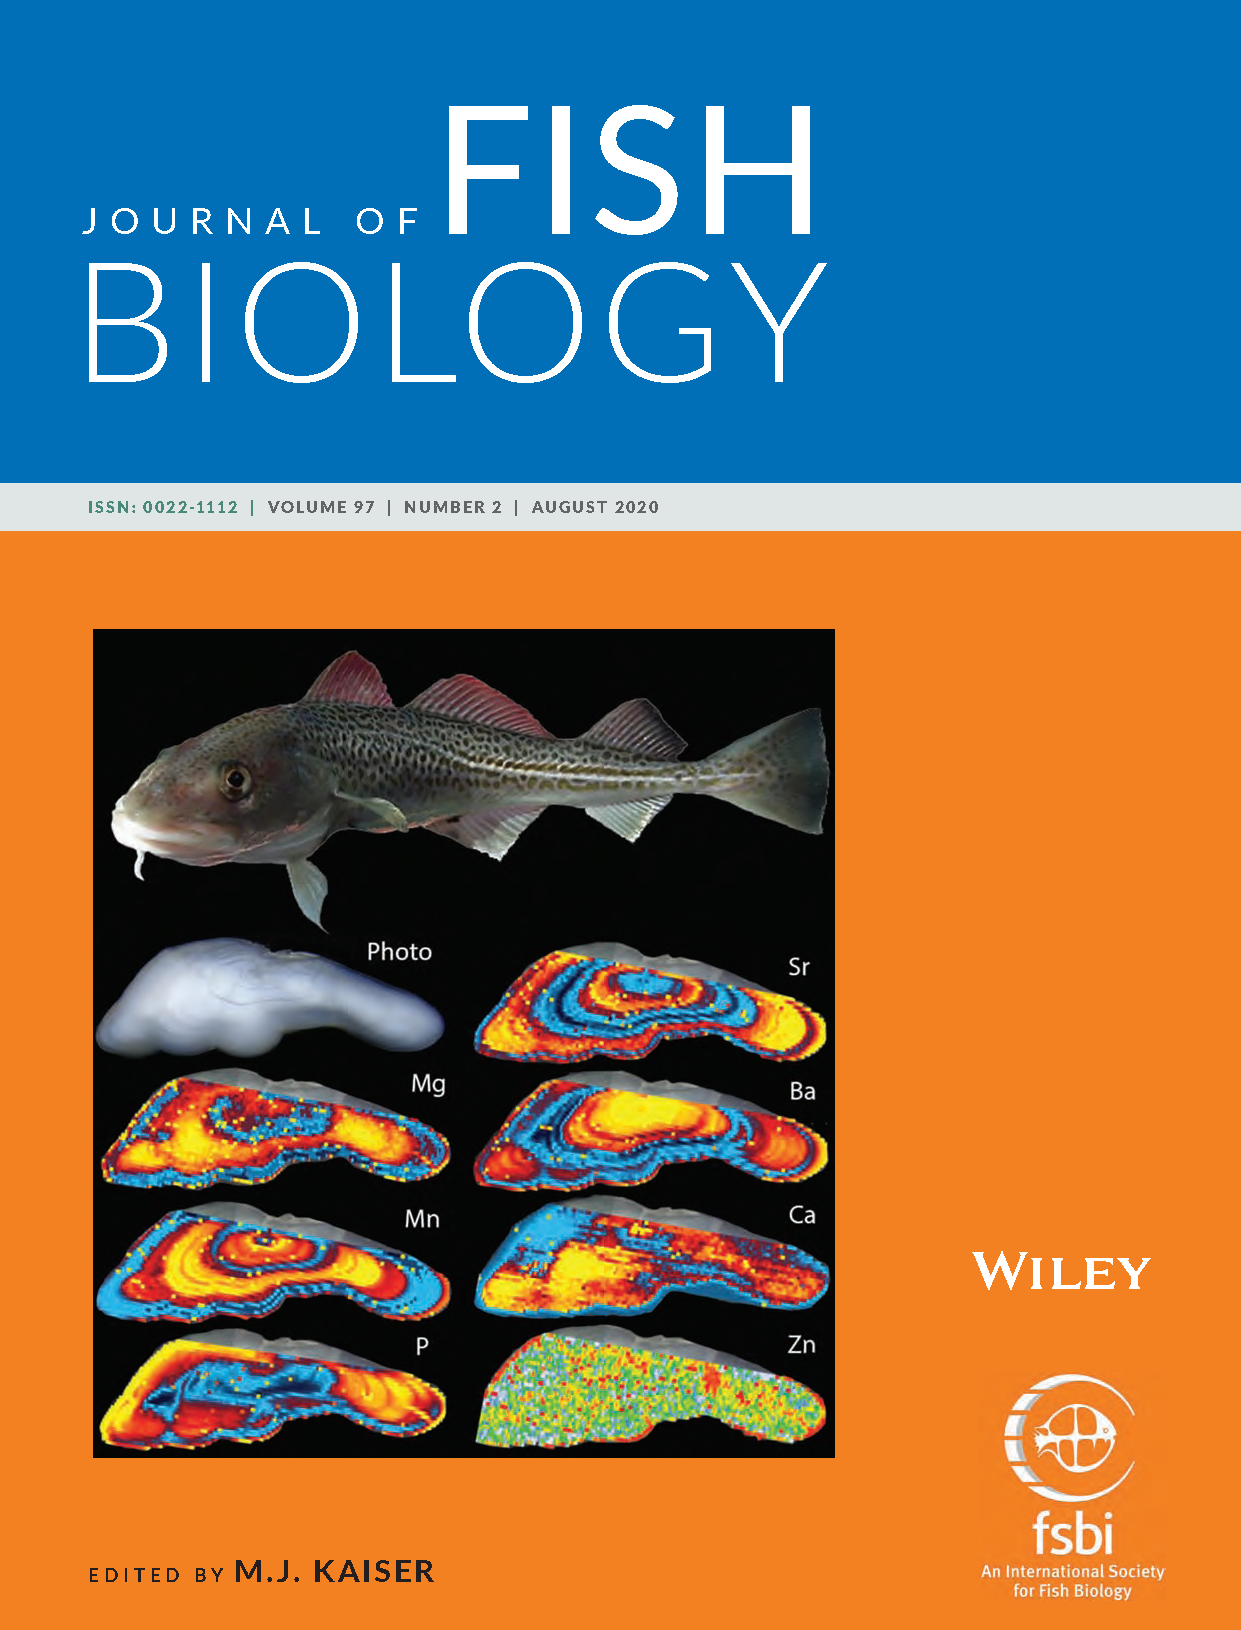 The art on the cover of this issue of journal of fish biology was designed by Yvette Heimbrand